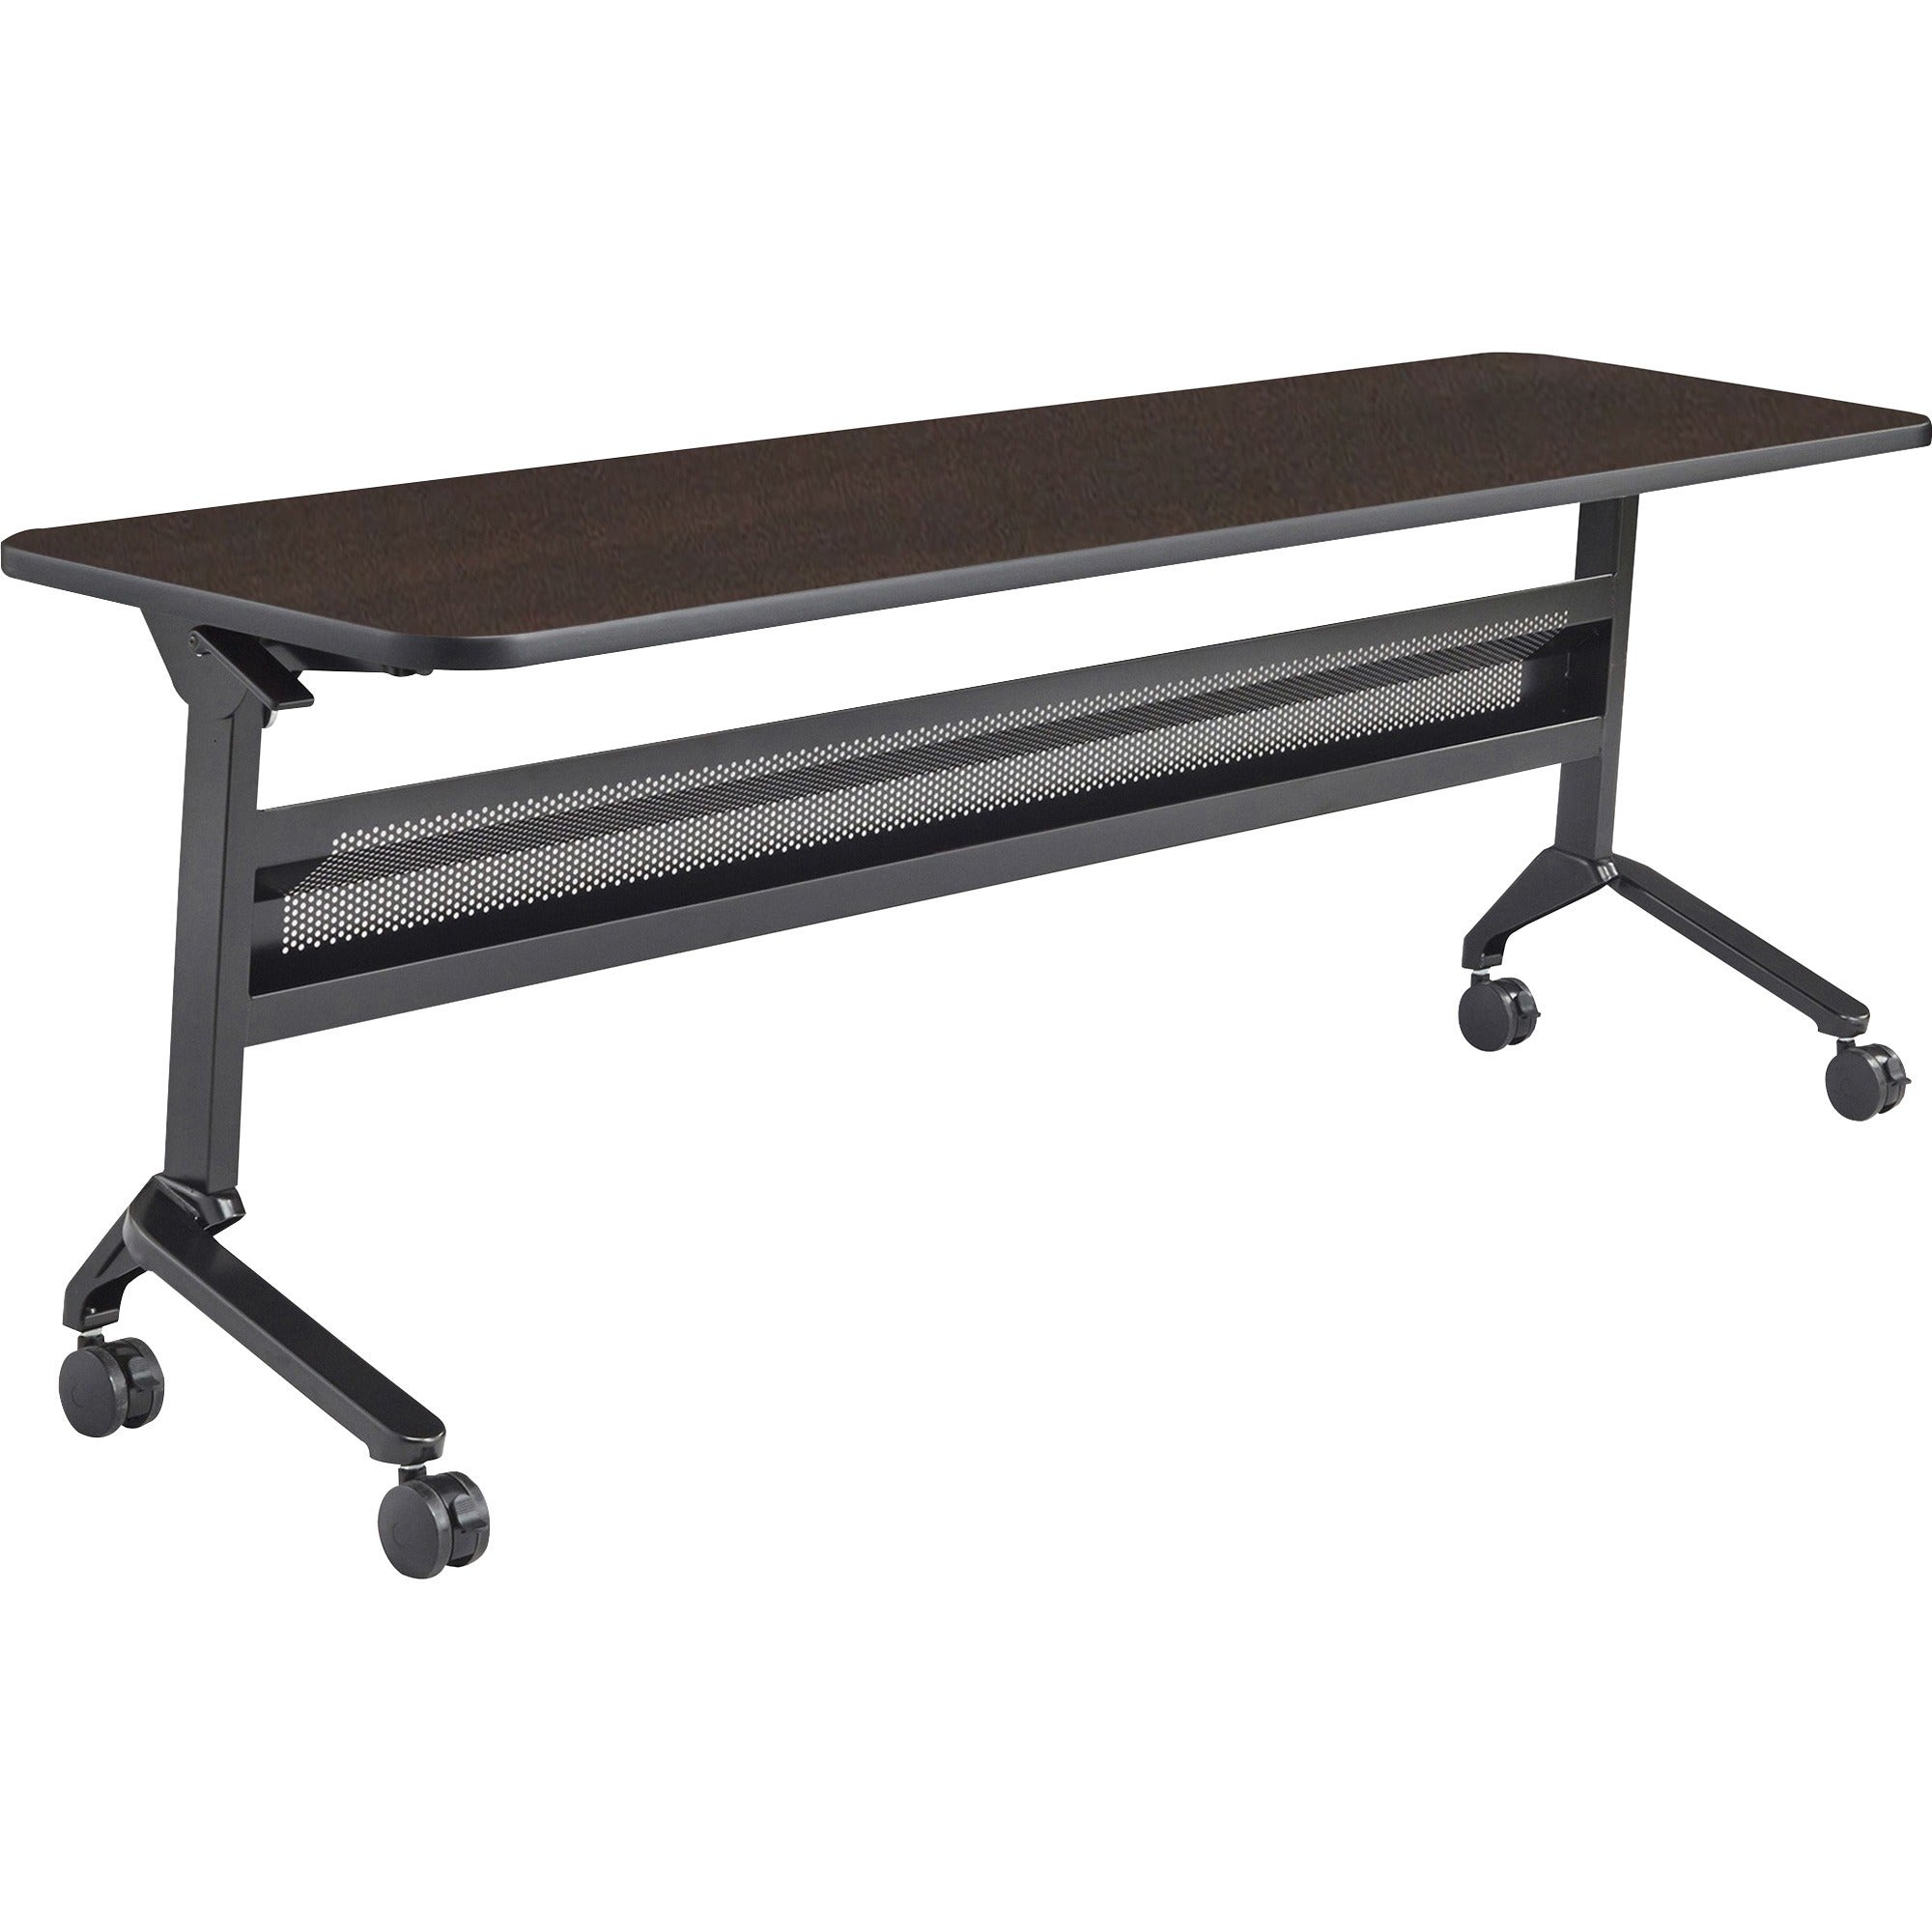 safco-flip-n-go-rectangular-training-table-for-table-topmocha-rectangle-top-black-base-150-lb-capacity-x-72-table-top-width-x-24-table-top-depth-x-120-table-top-thickness-29-height-assembly-required-low-pressure-laminate-lpl-top_saflf2472tsldcm - 1